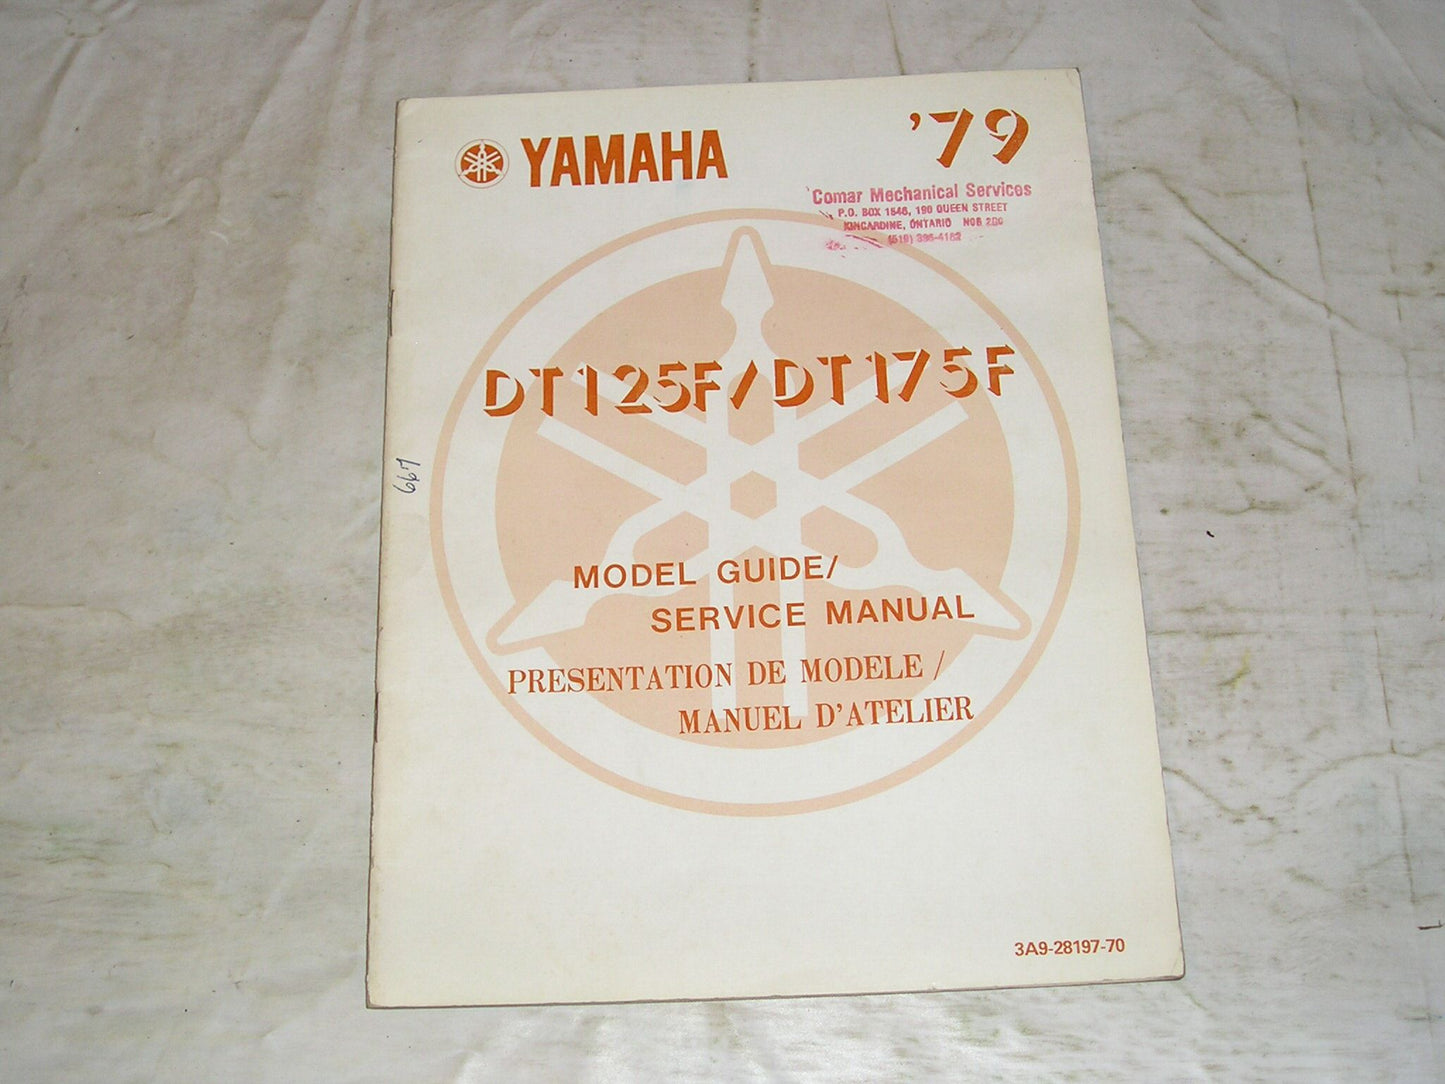 YAMAHA DT125 DT175 F 1979 Model Guide Service Manual  3A9-28197-70  #667